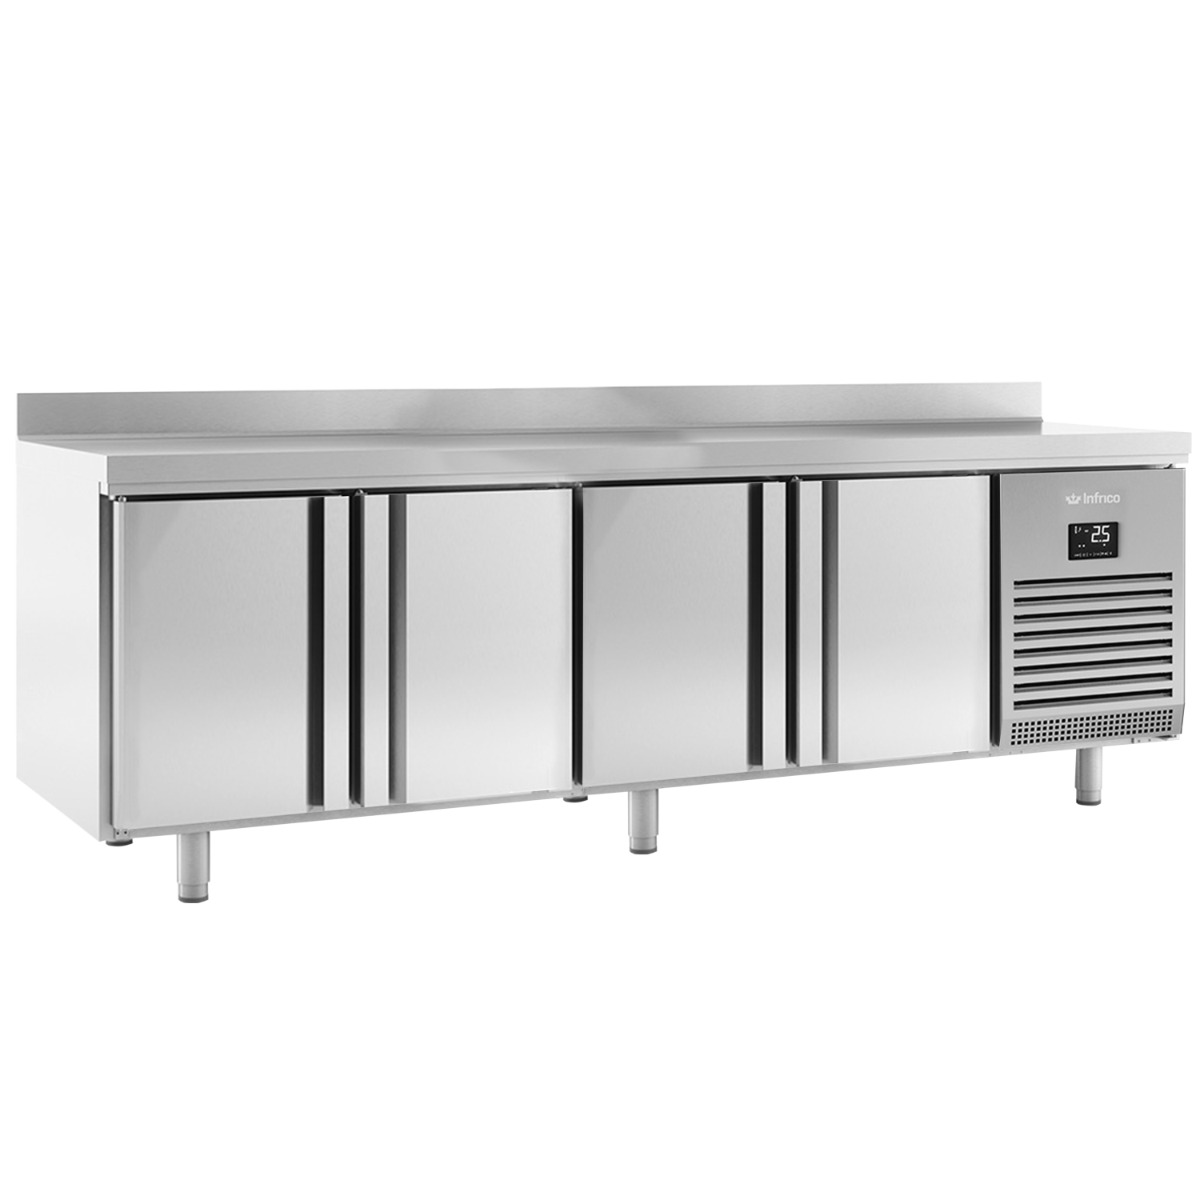 INFRICO 4 DOOR GN1/1 COUNTER WITH UPSTAND 625L - BMGN2450